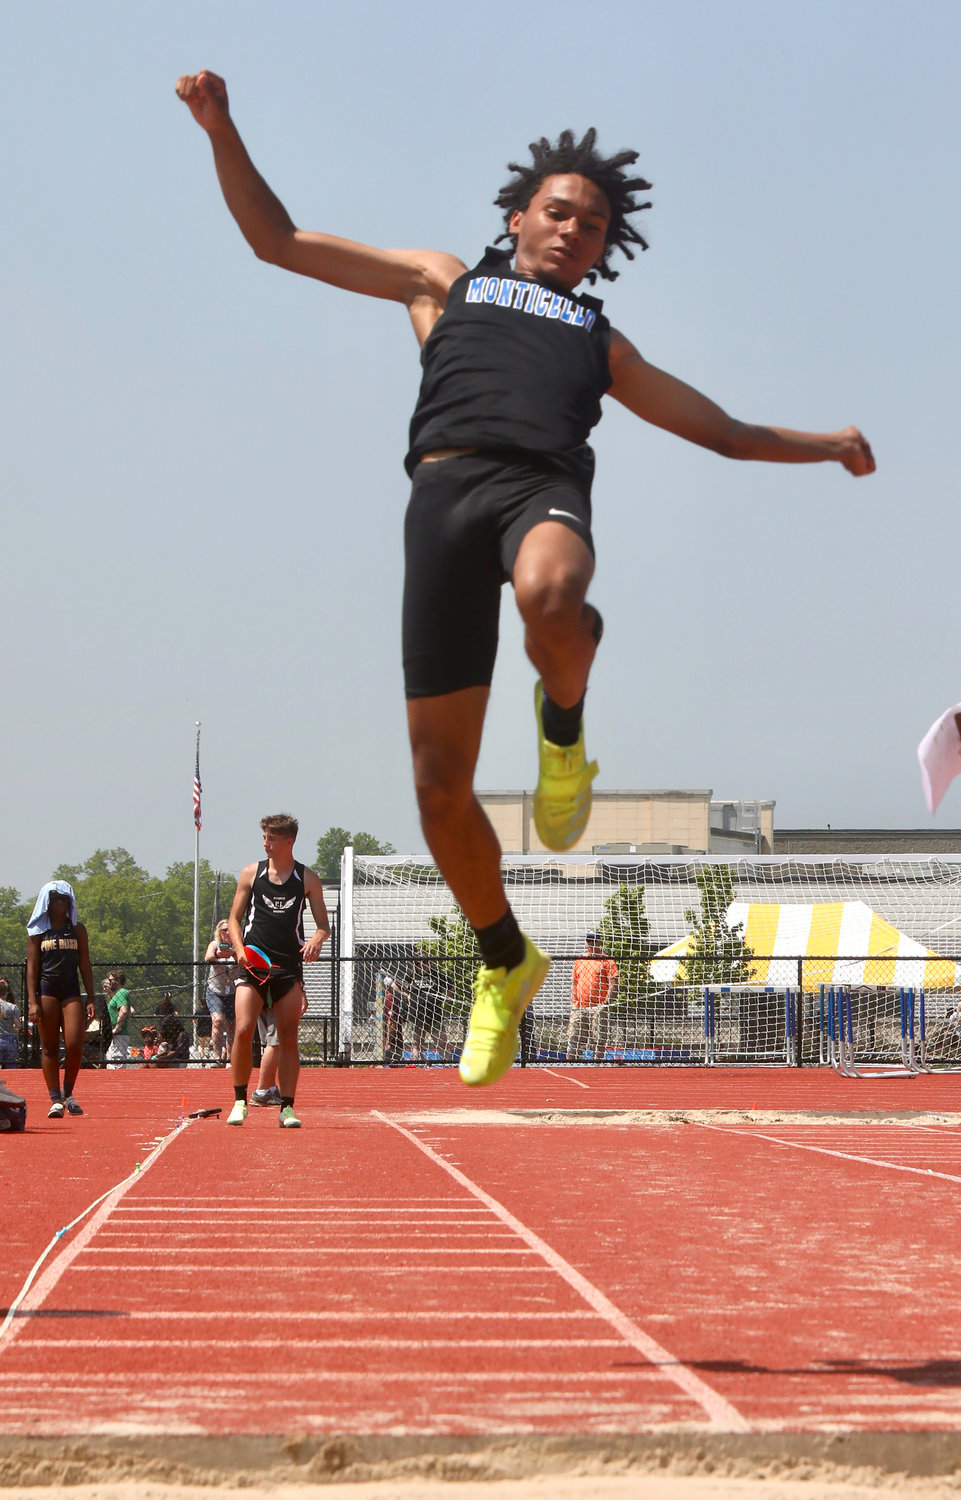 Monticello’s magical leaper Jadden Bryant had an incredible week. After sweeping all the long, high and triple jumps in the Division title win over Beacon, he won the high jump and the triple jump at the OCIAA Championships.